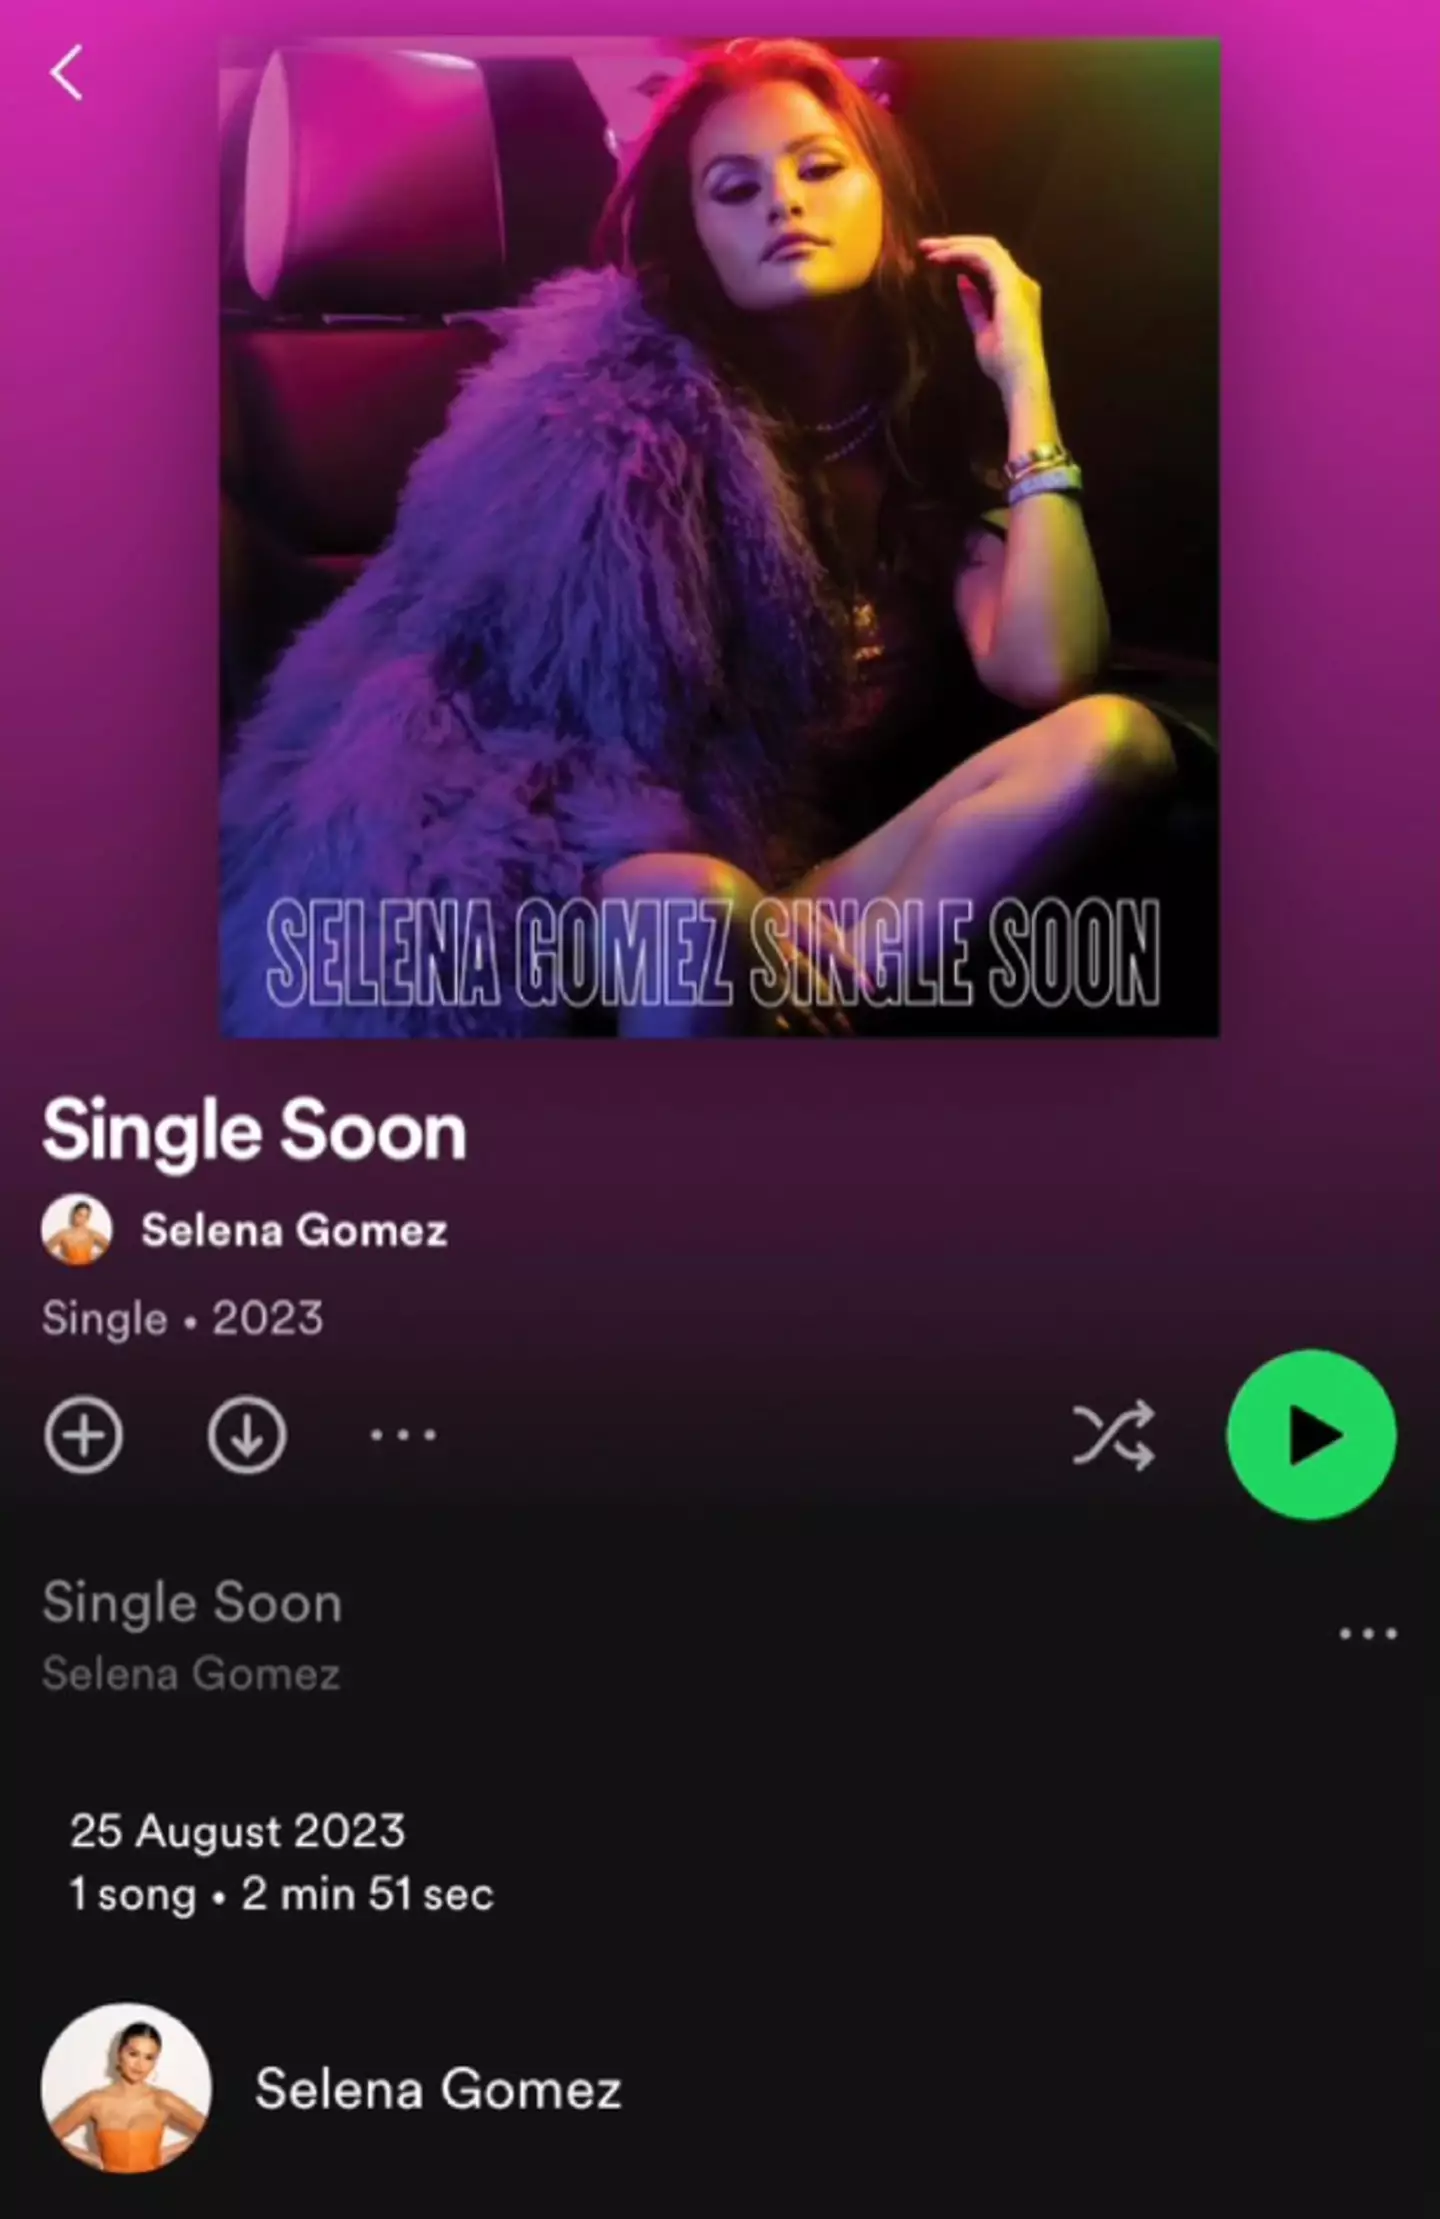 Fans are unable to play Gomez's latest single.